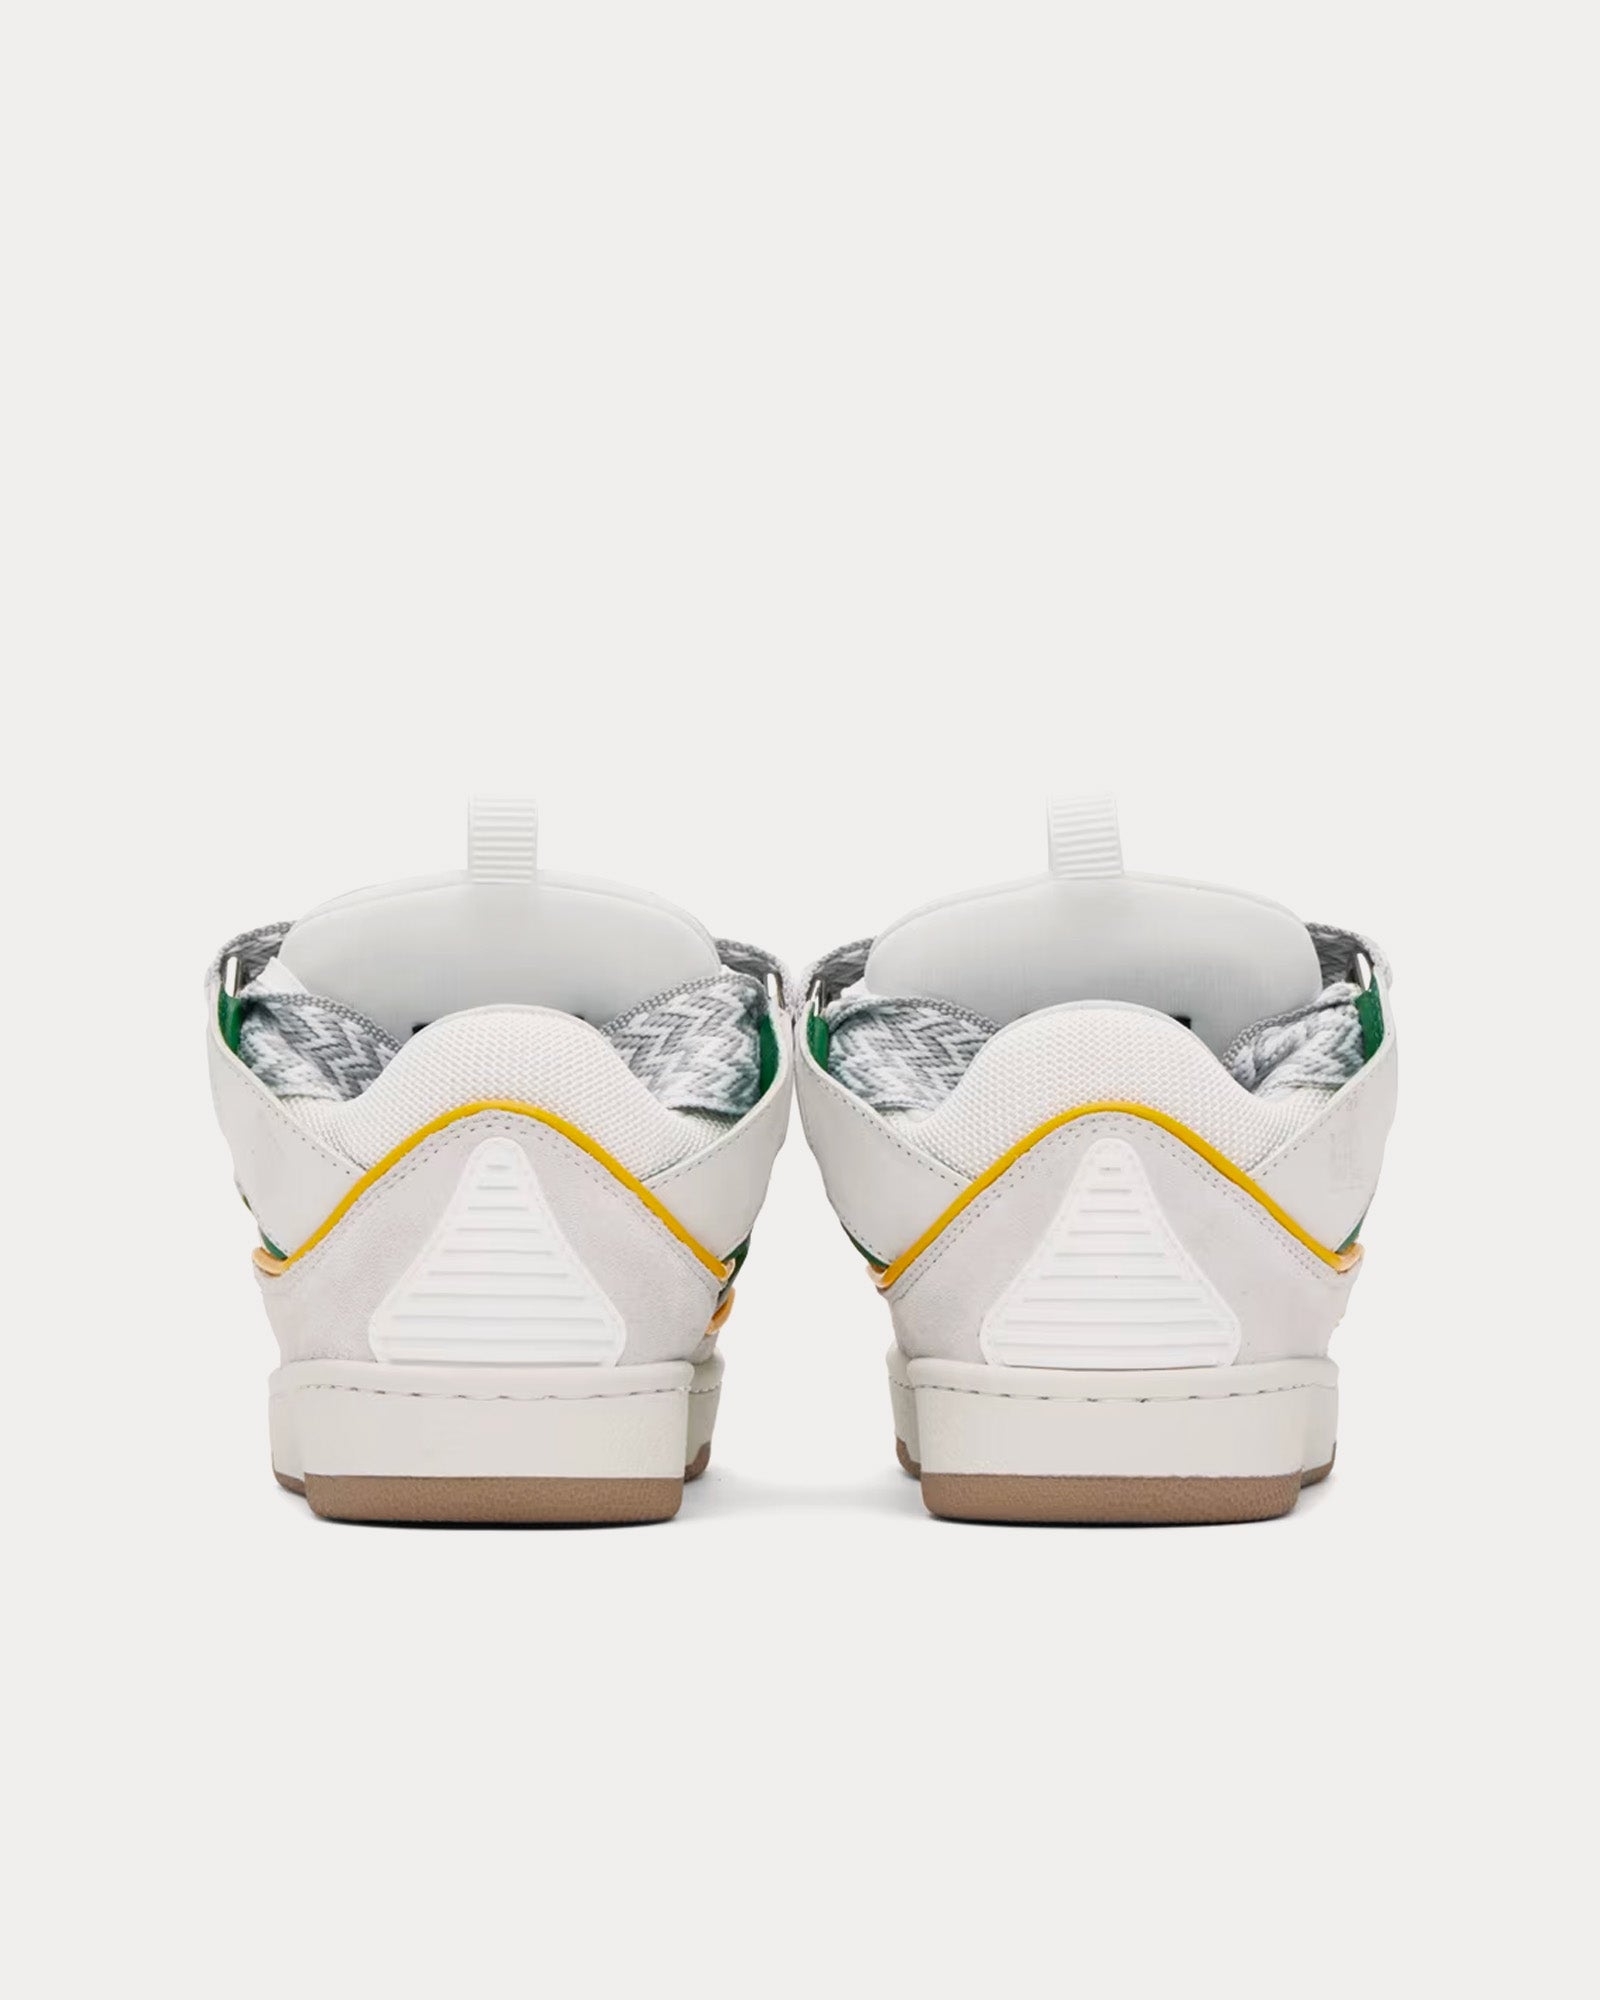 Lanvin - Curb Leather White / Green Low Top Sneakers